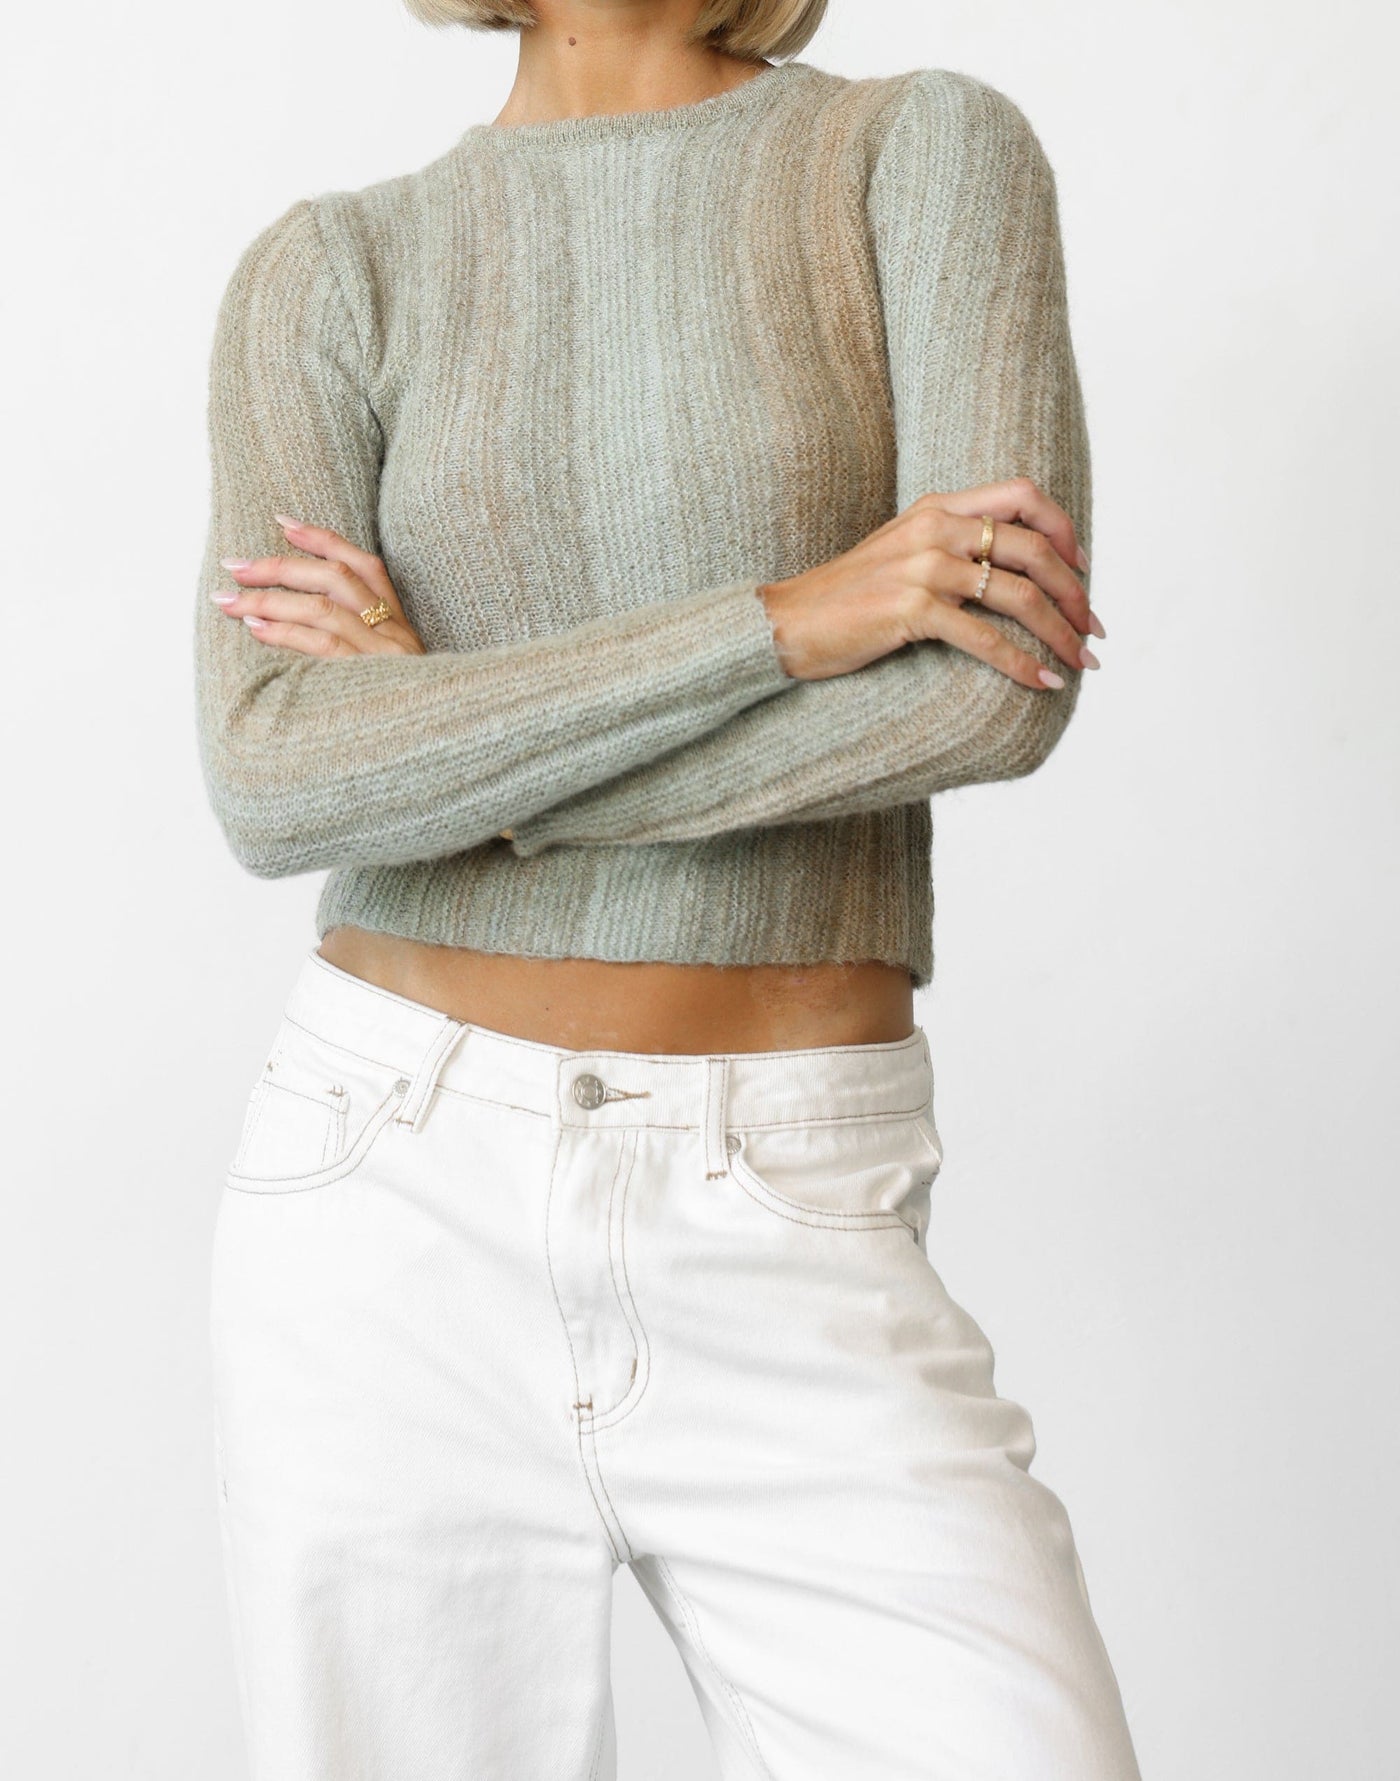 Lori Top (Green) - Fuzzy Knit Detail Ribbed Top - Women's Top - Charcoal Clothing